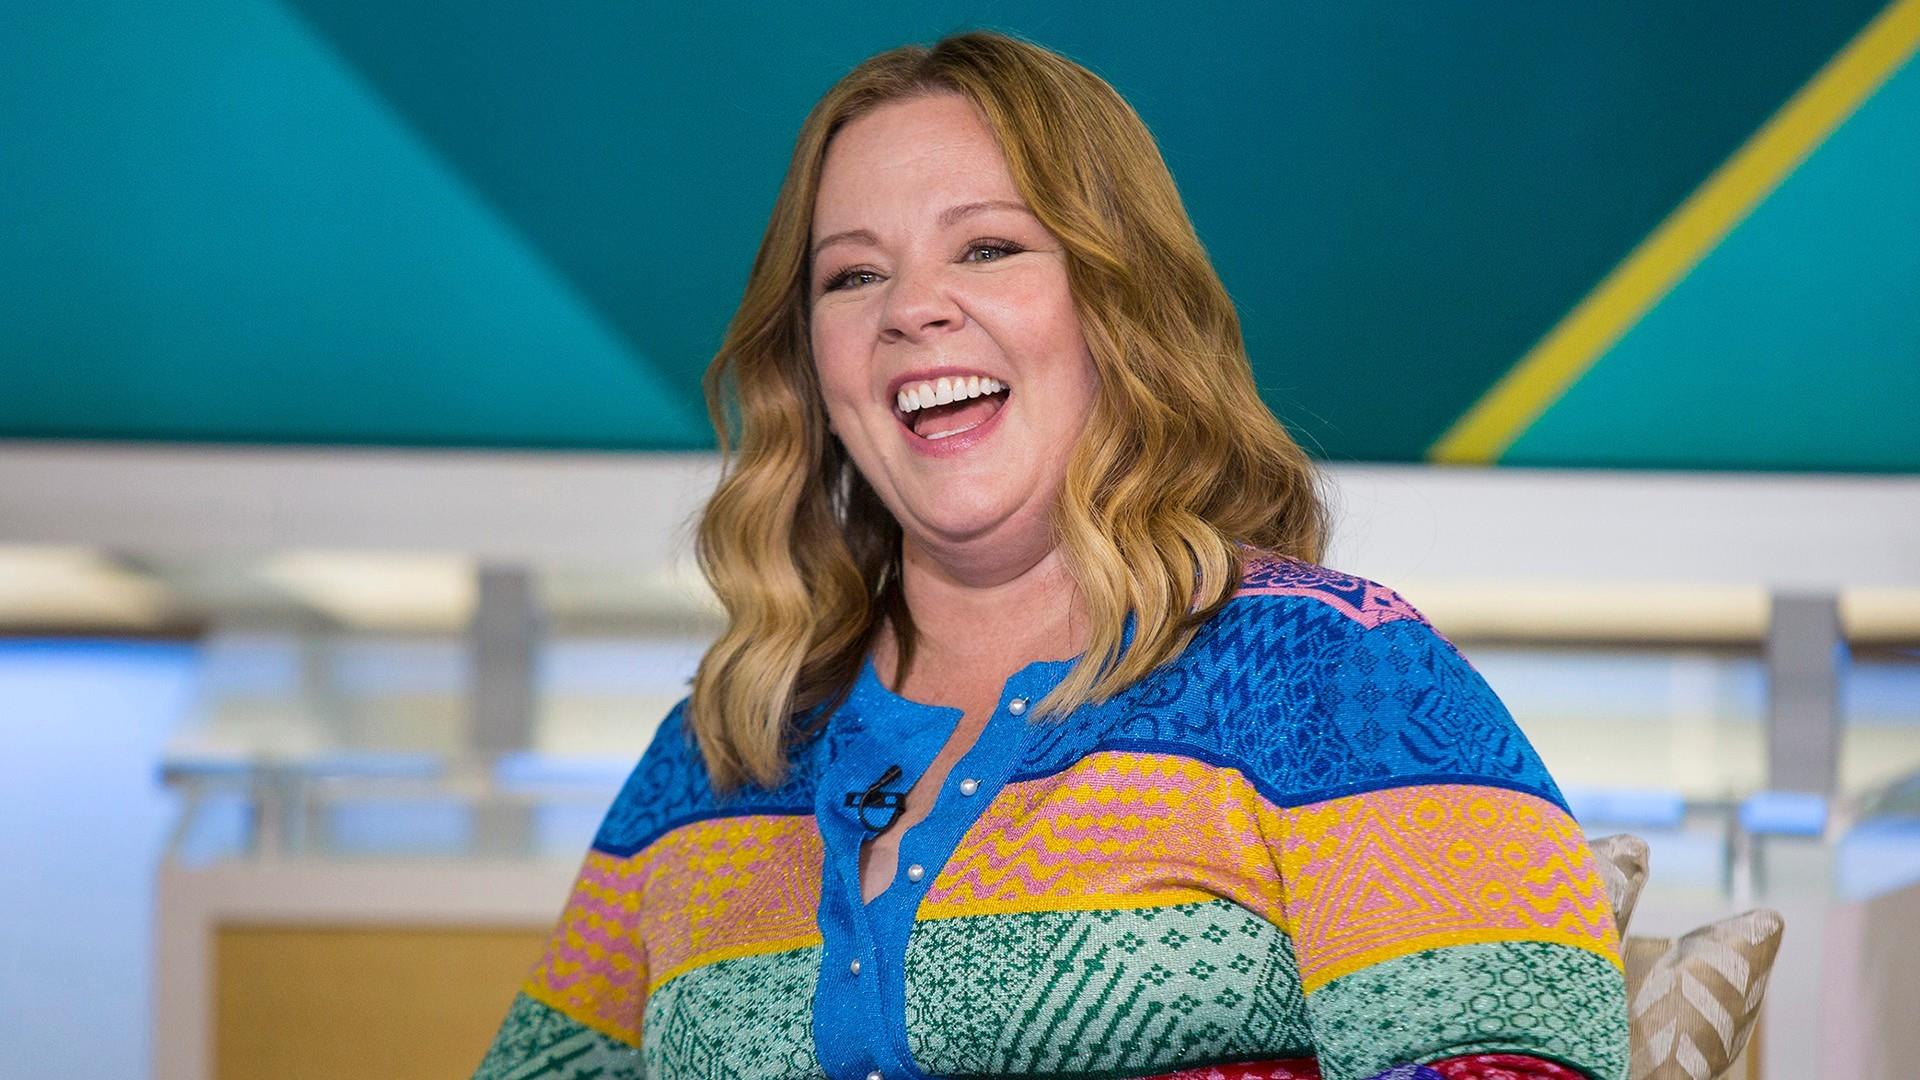 Melissa McCarthy surprises TODAY fans in the green room.